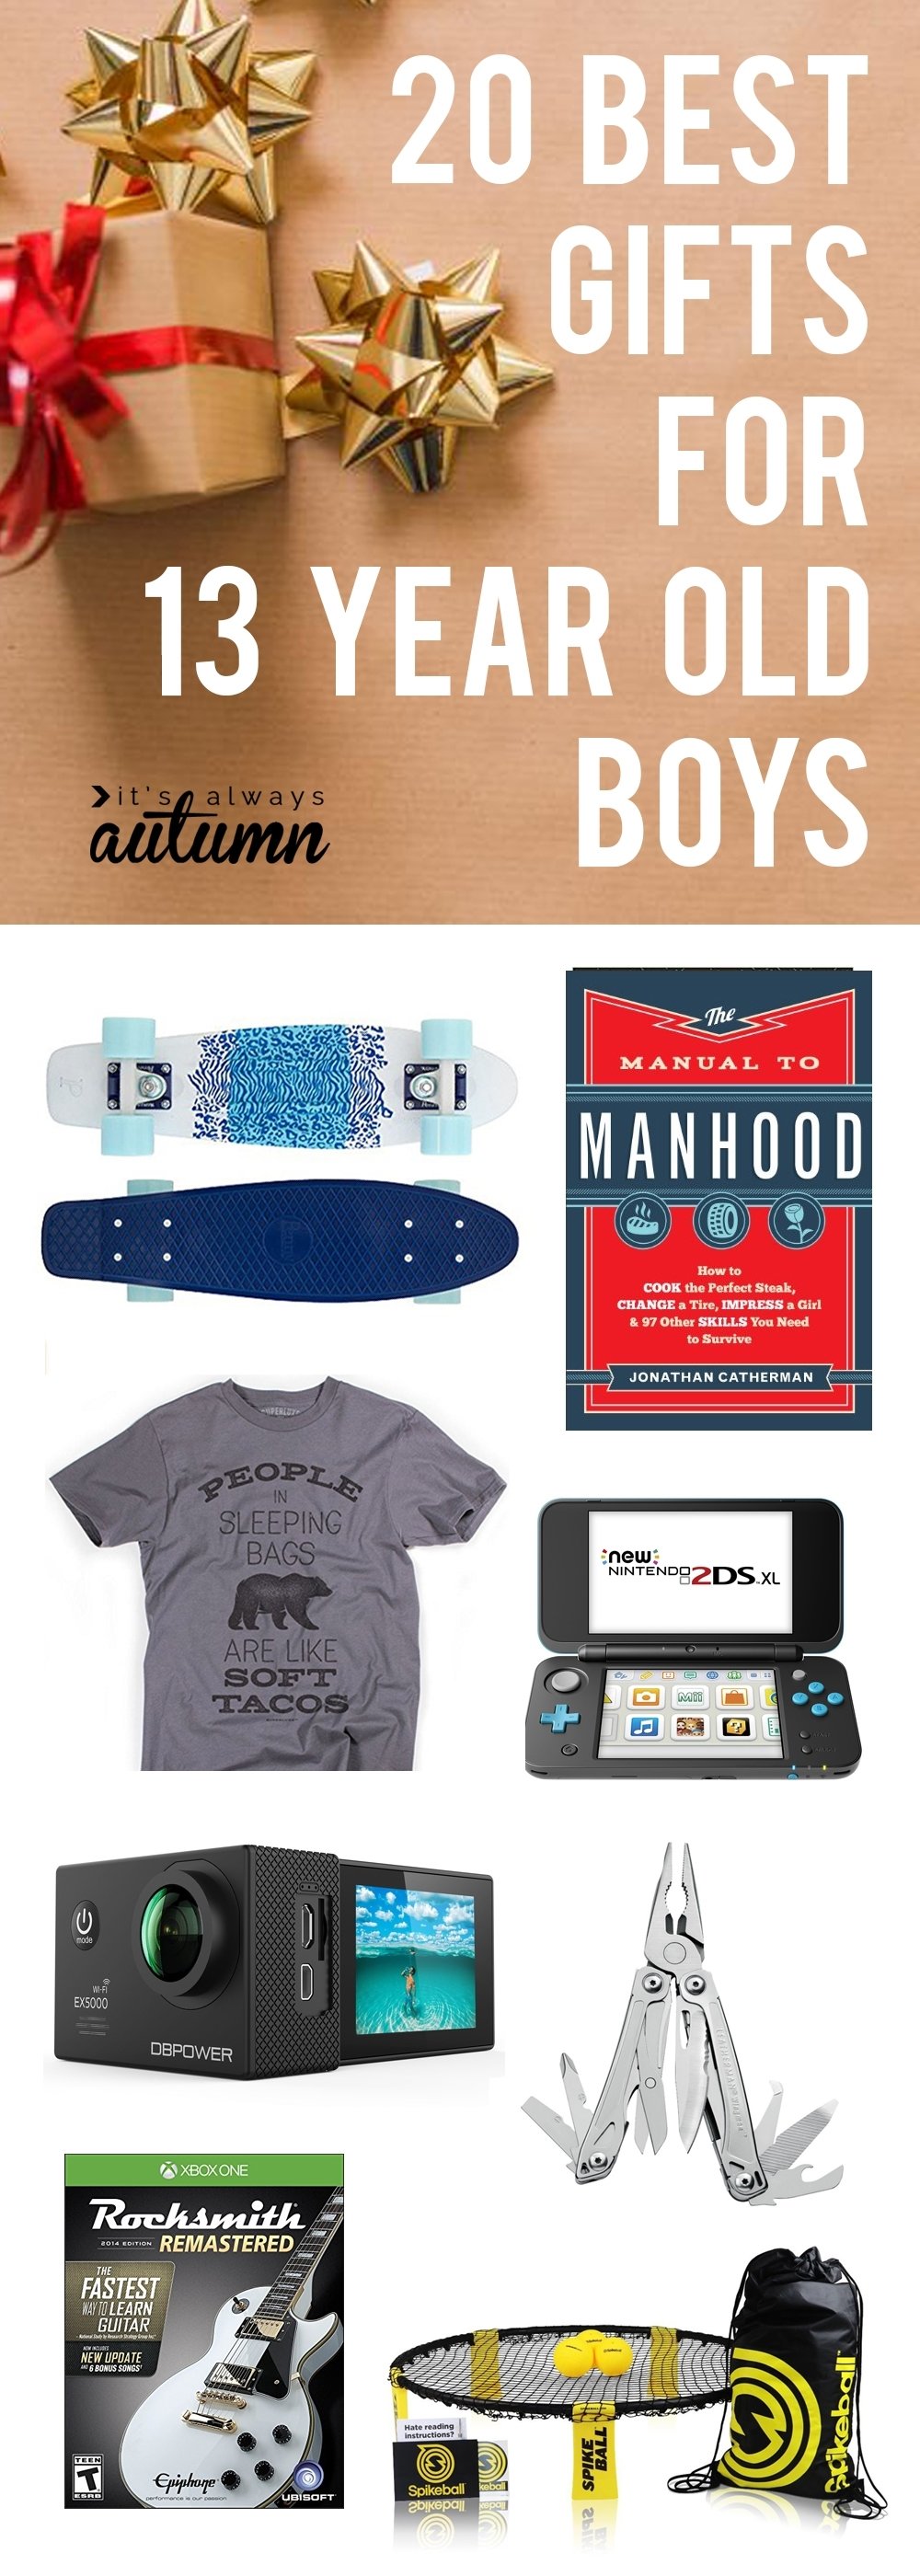 10 Unique Christmas Gift Ideas 15 Year Old Boy best christmas gifts for 13 year old boys its always autumn 2022